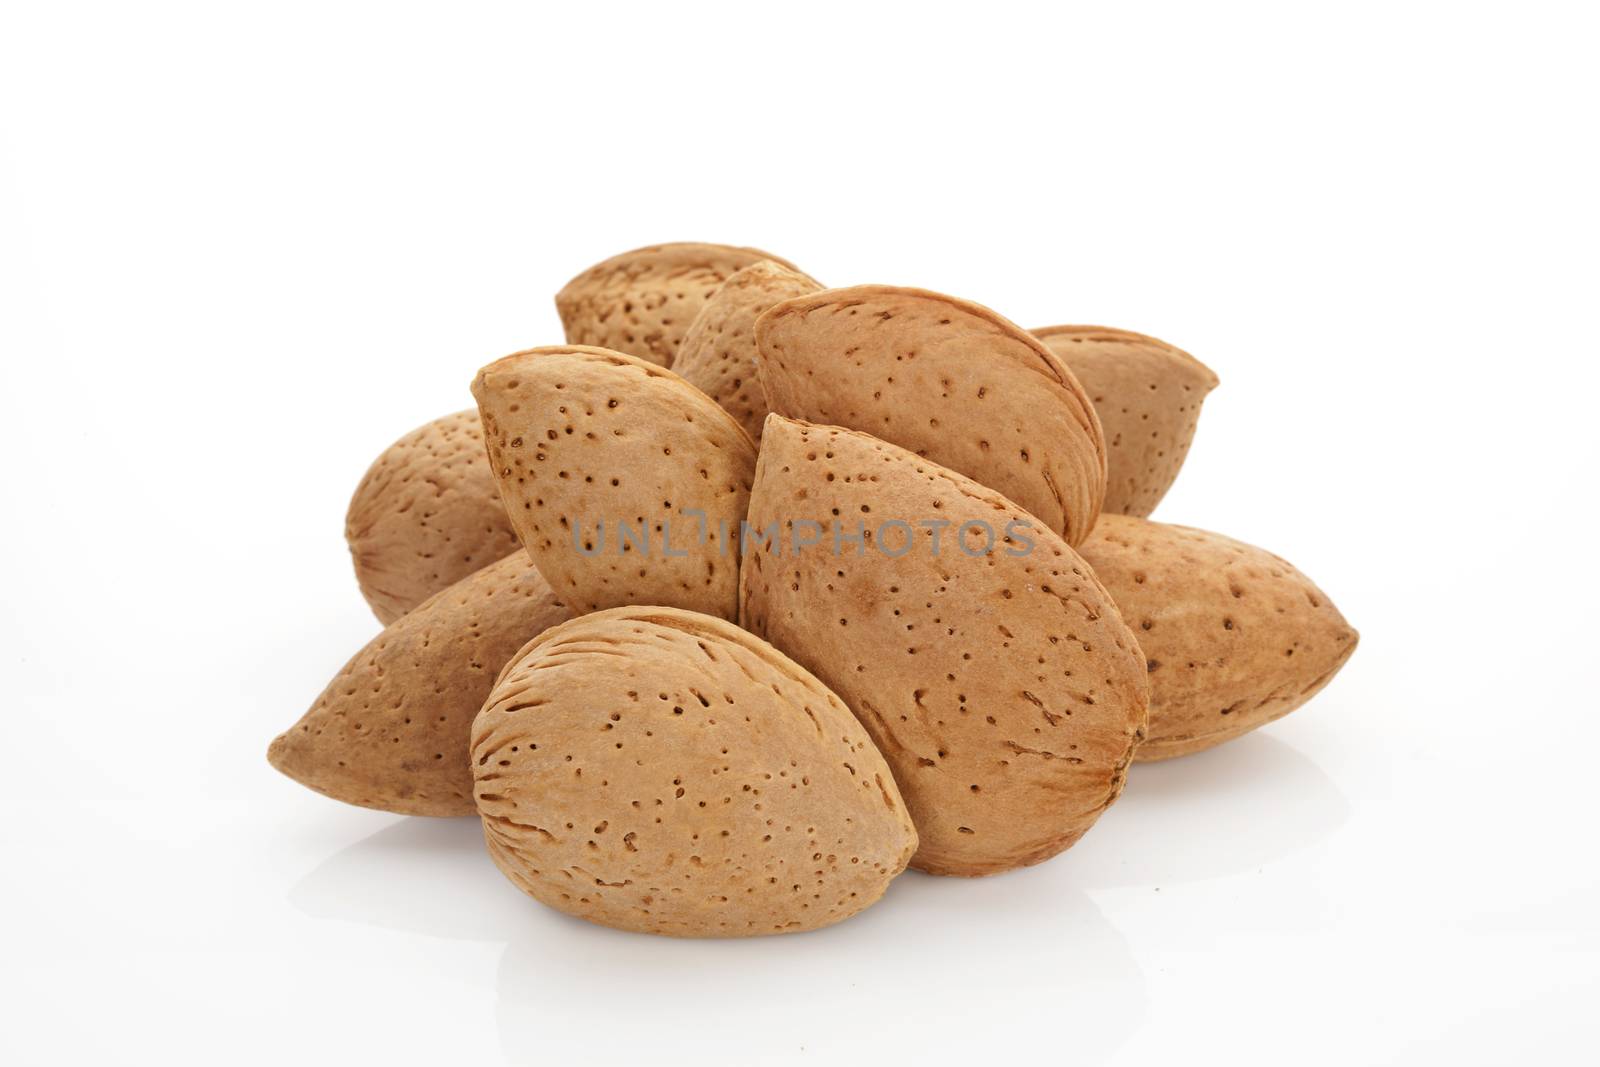 Almond nuts heap isolated on white background. Culinary nuts concept.